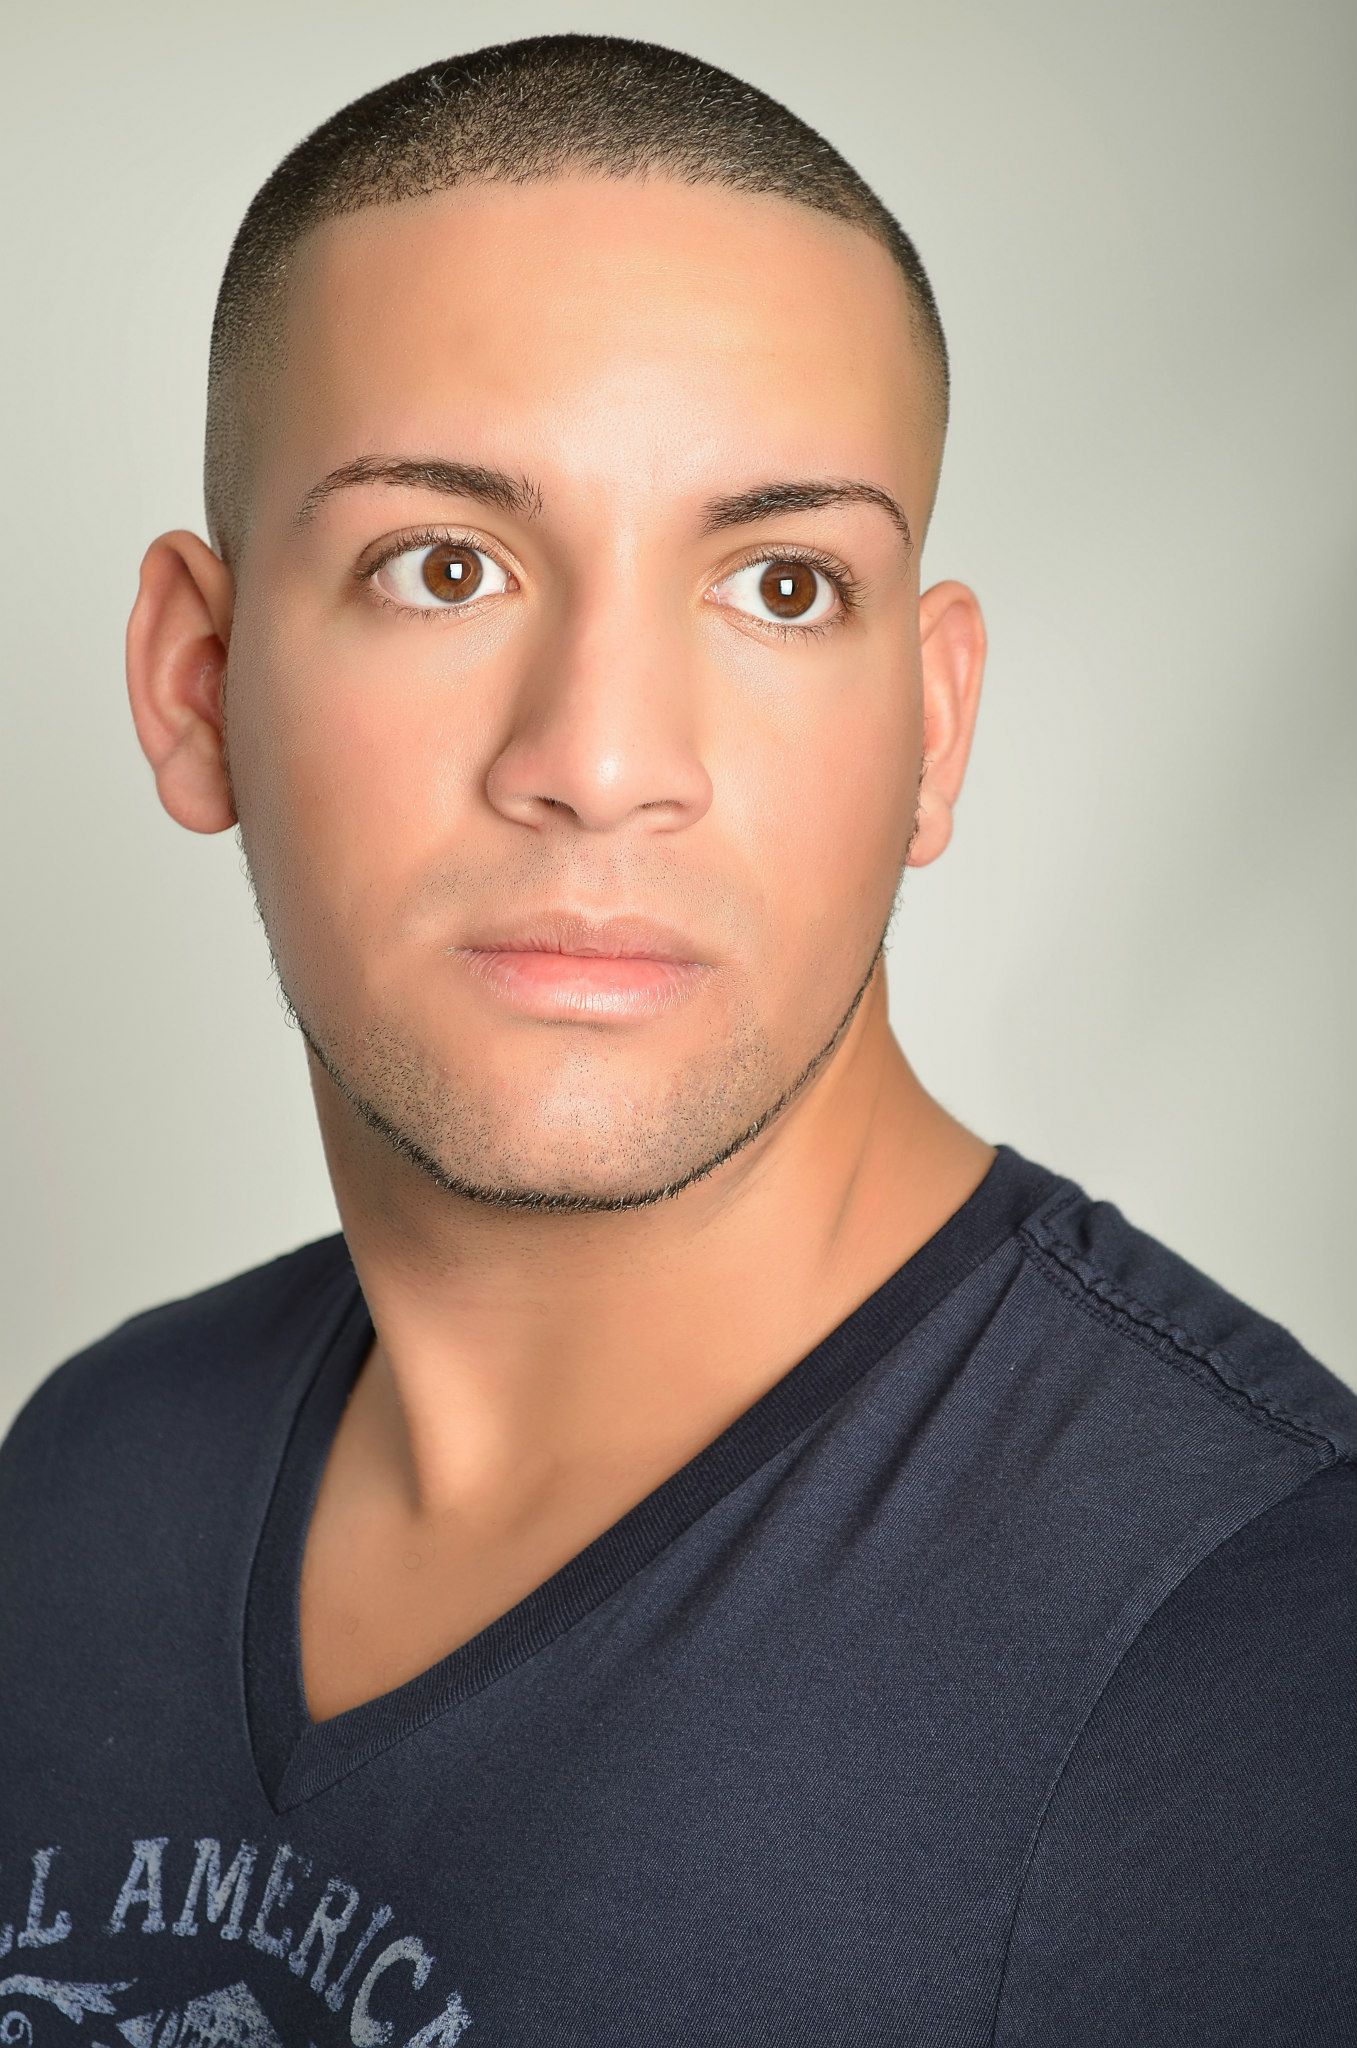 My head shot done by Ripped Genes Photography